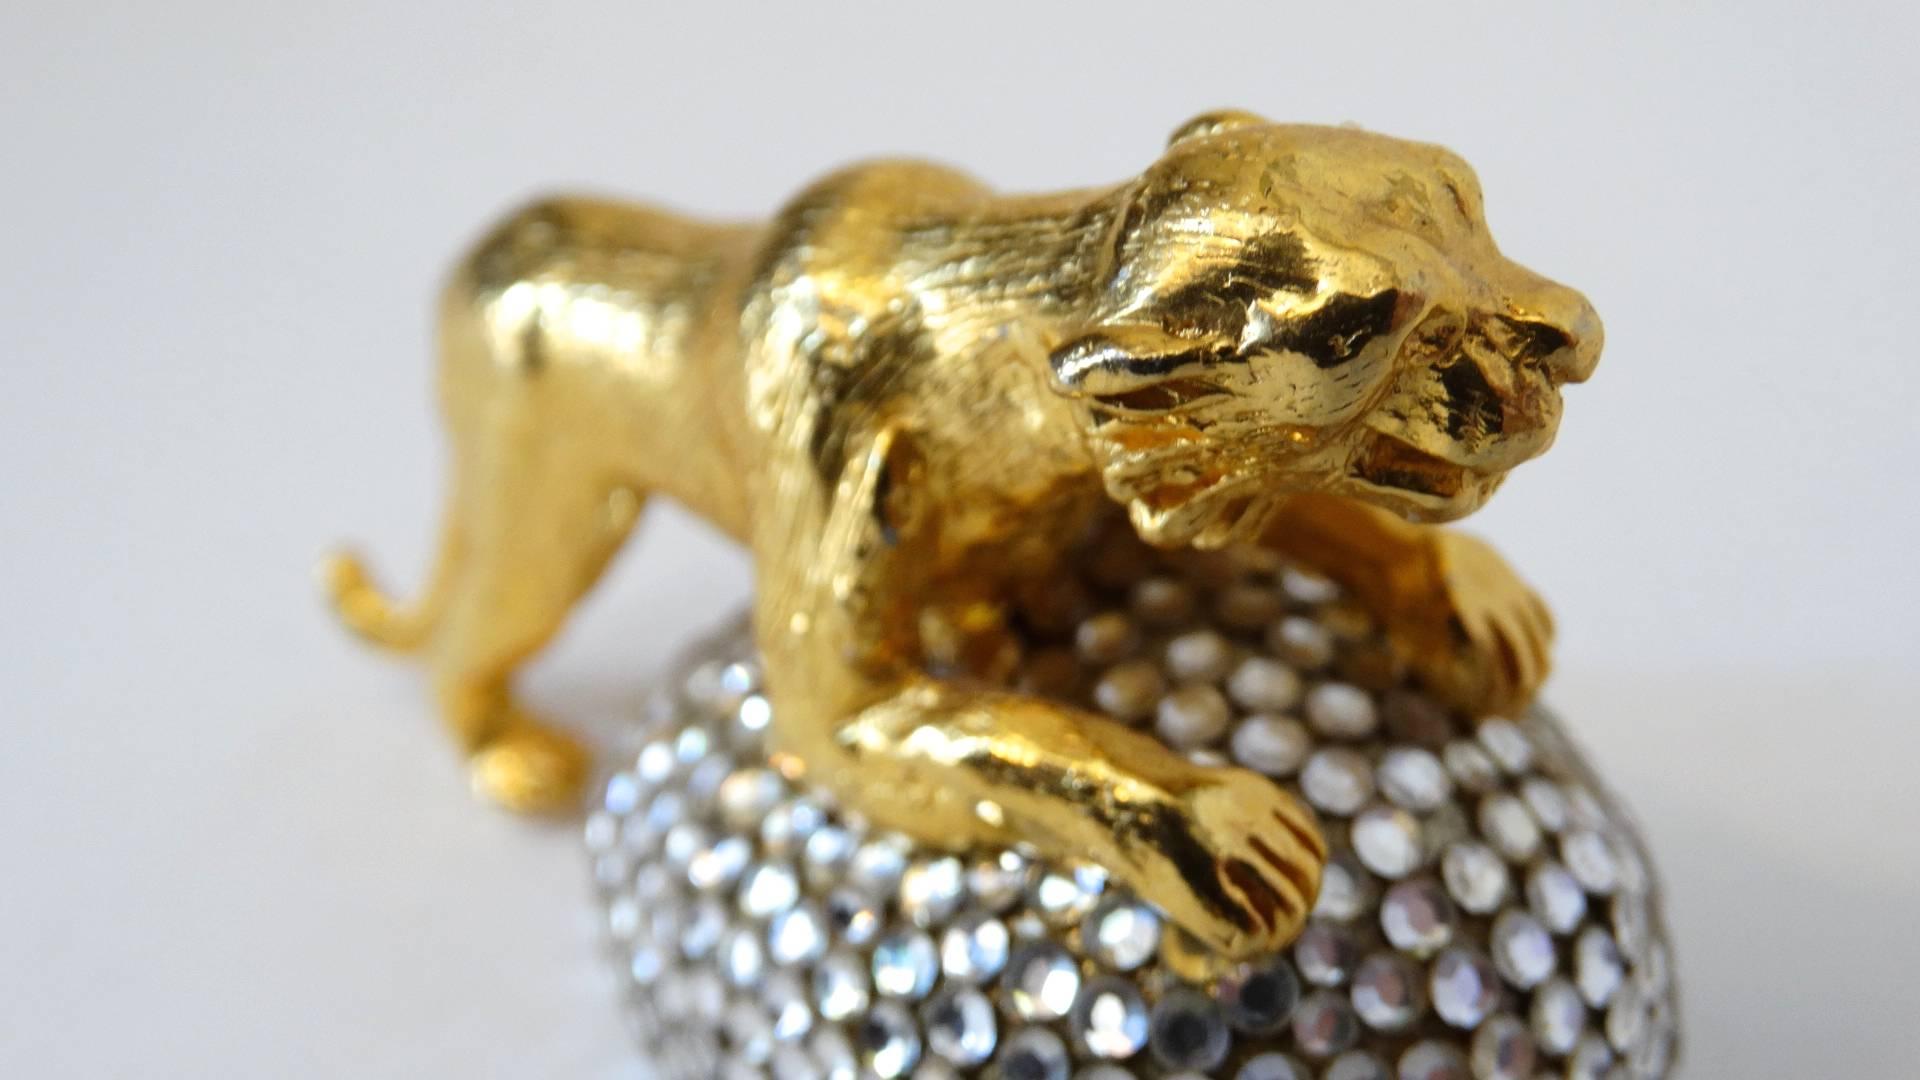 Extremely rare 1980's Judith Leiber Tiger vanity objet d'art . Gold plated hardware, with an encrusted Austrian Swarovski Crystals base. View our other listings object comes in pink, green, white, blue and bronze. Signed Judith Leiber underneath.